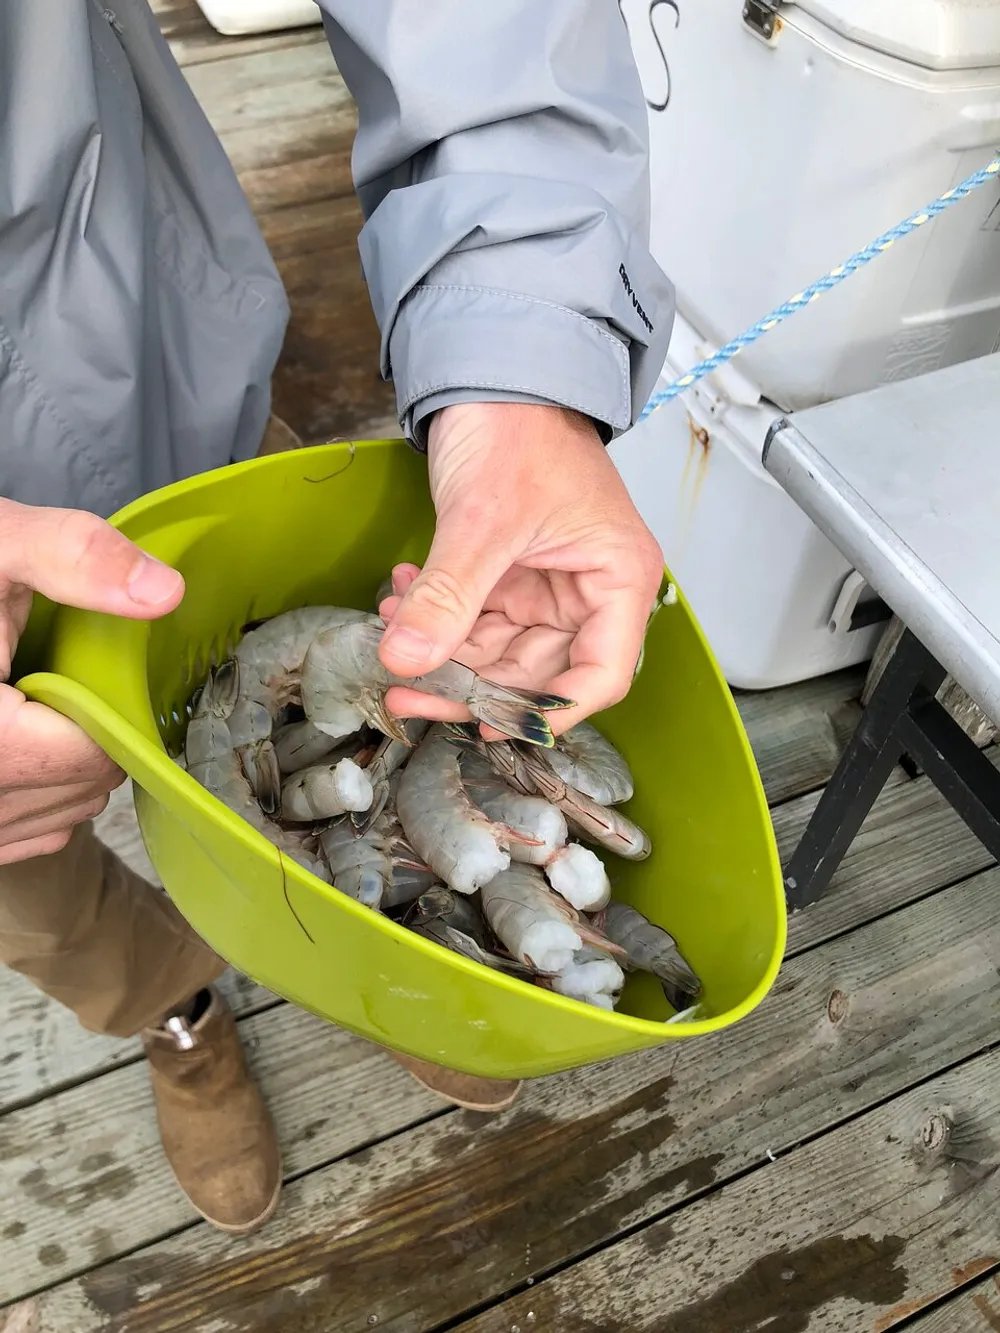 A person is holding a green container full of uncooked shrimps on a wooden dock